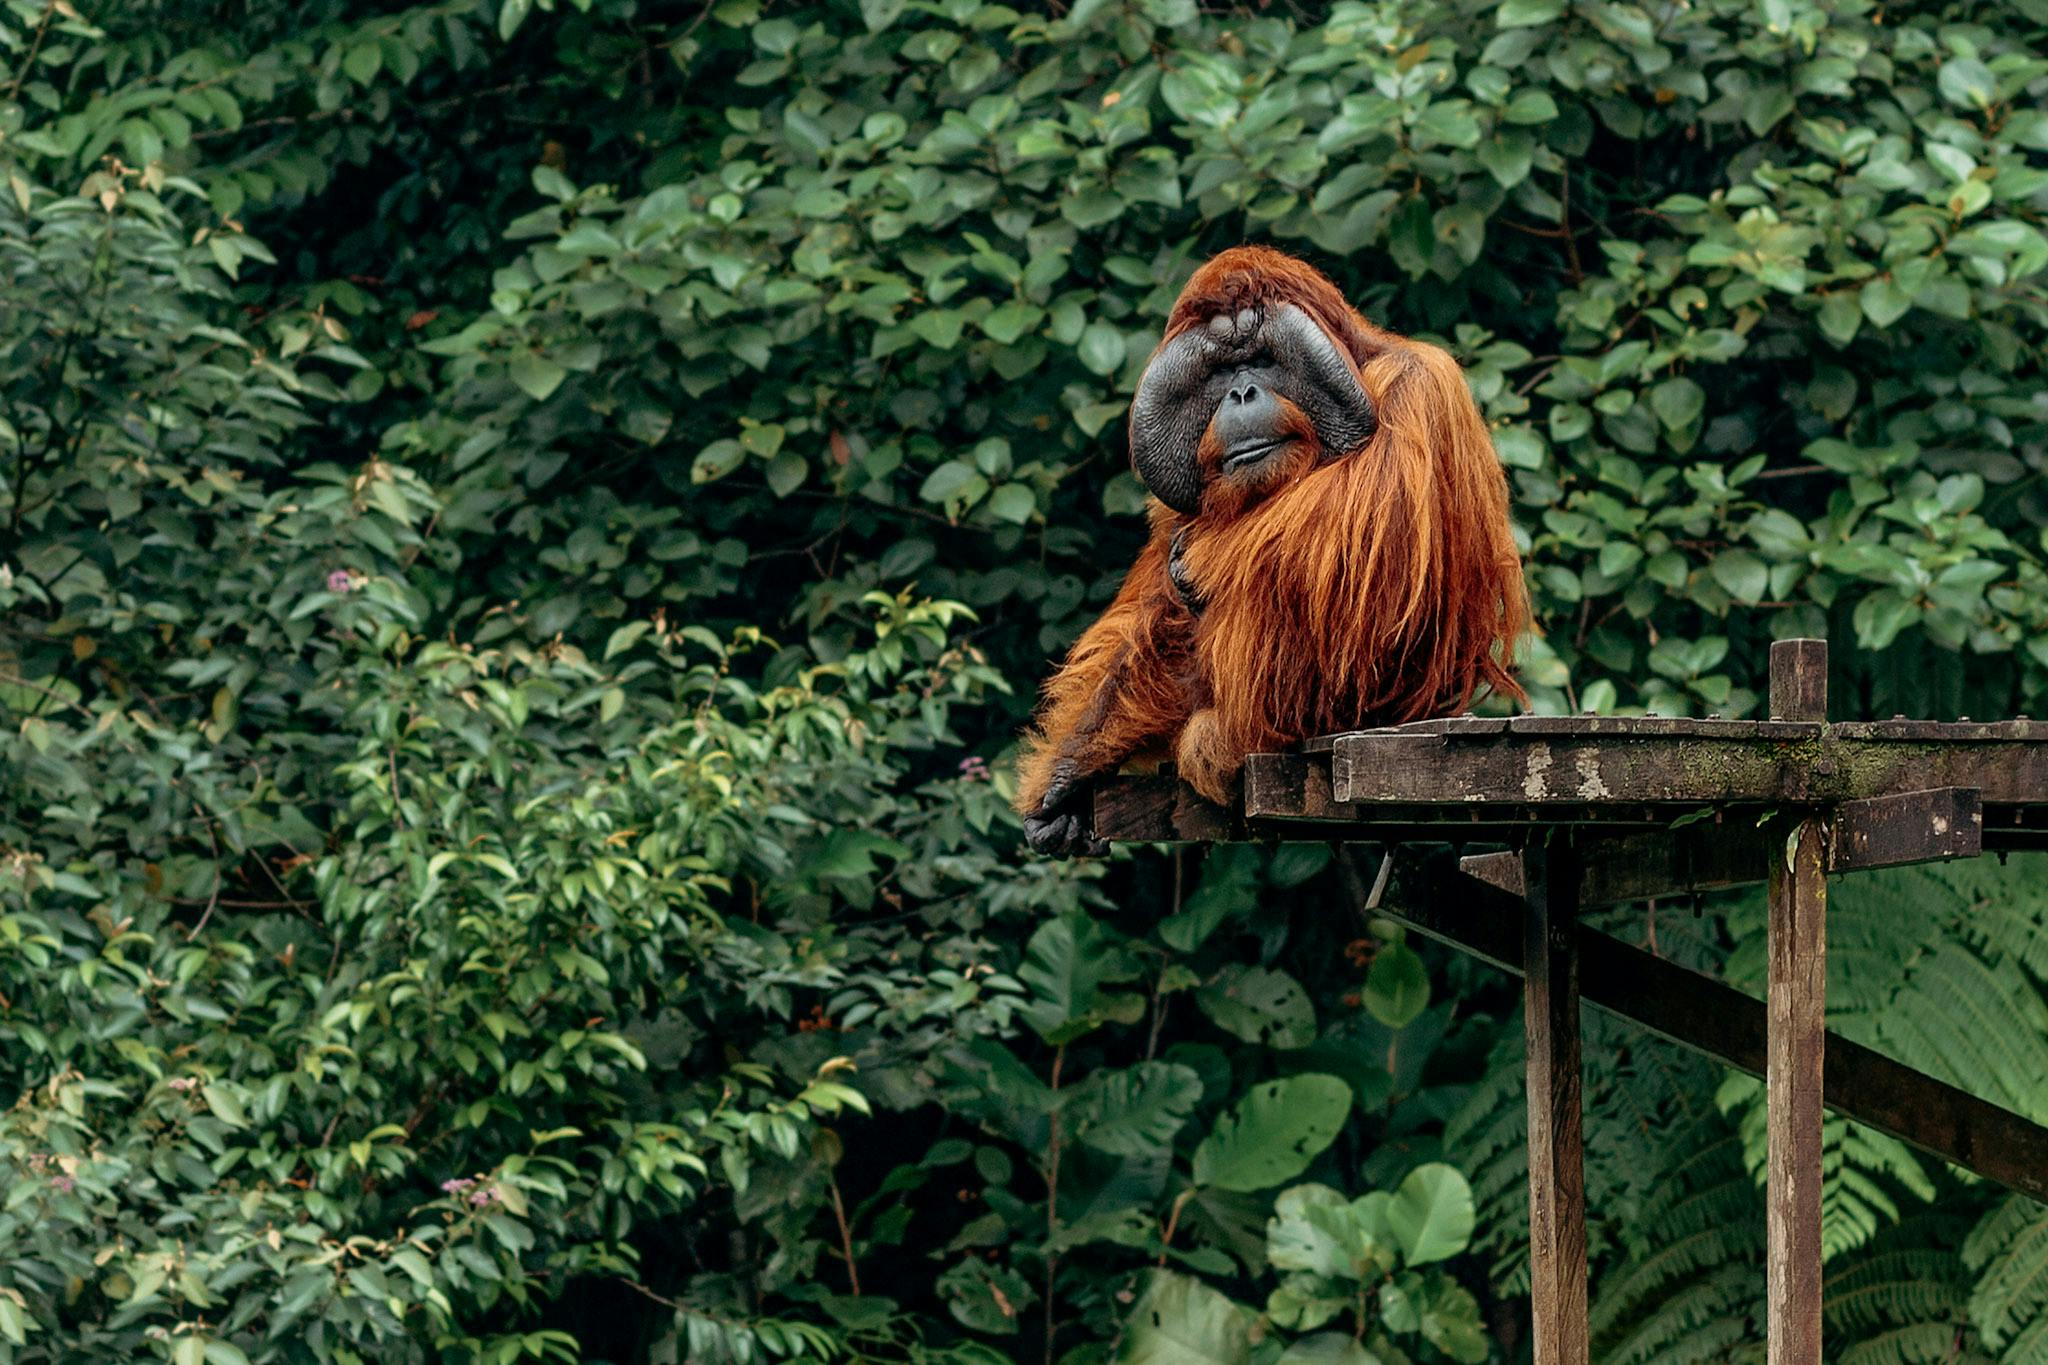 Get to see rescued orangutans